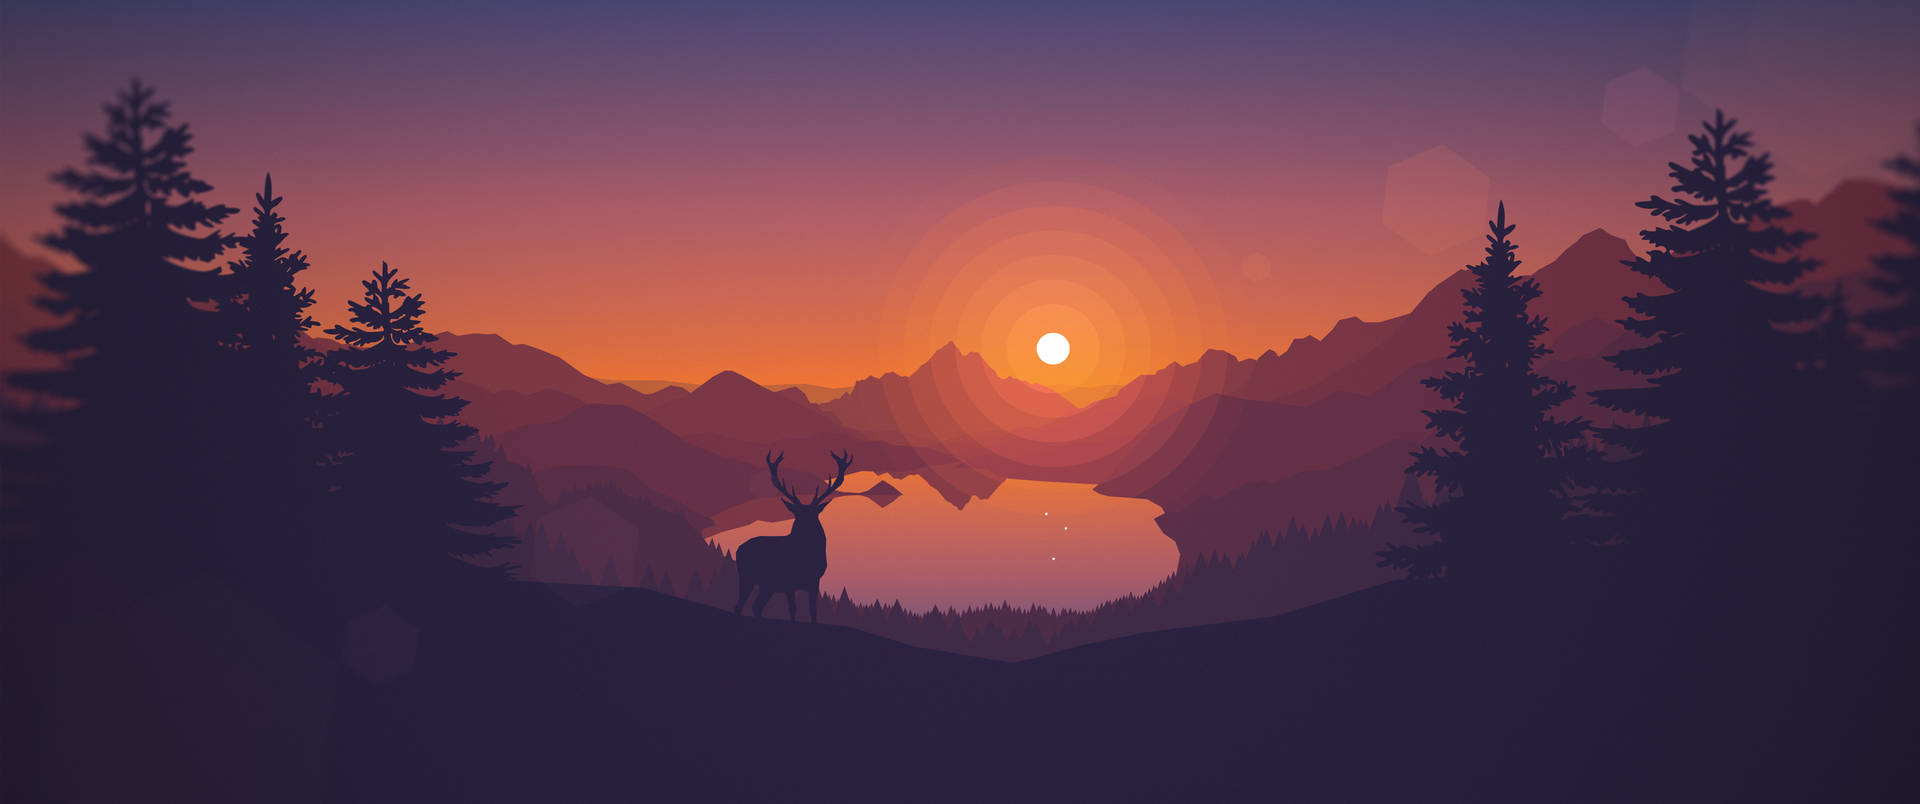 Ultrawide Aesthetic and minimalistic background with deer on forest with pine trees.